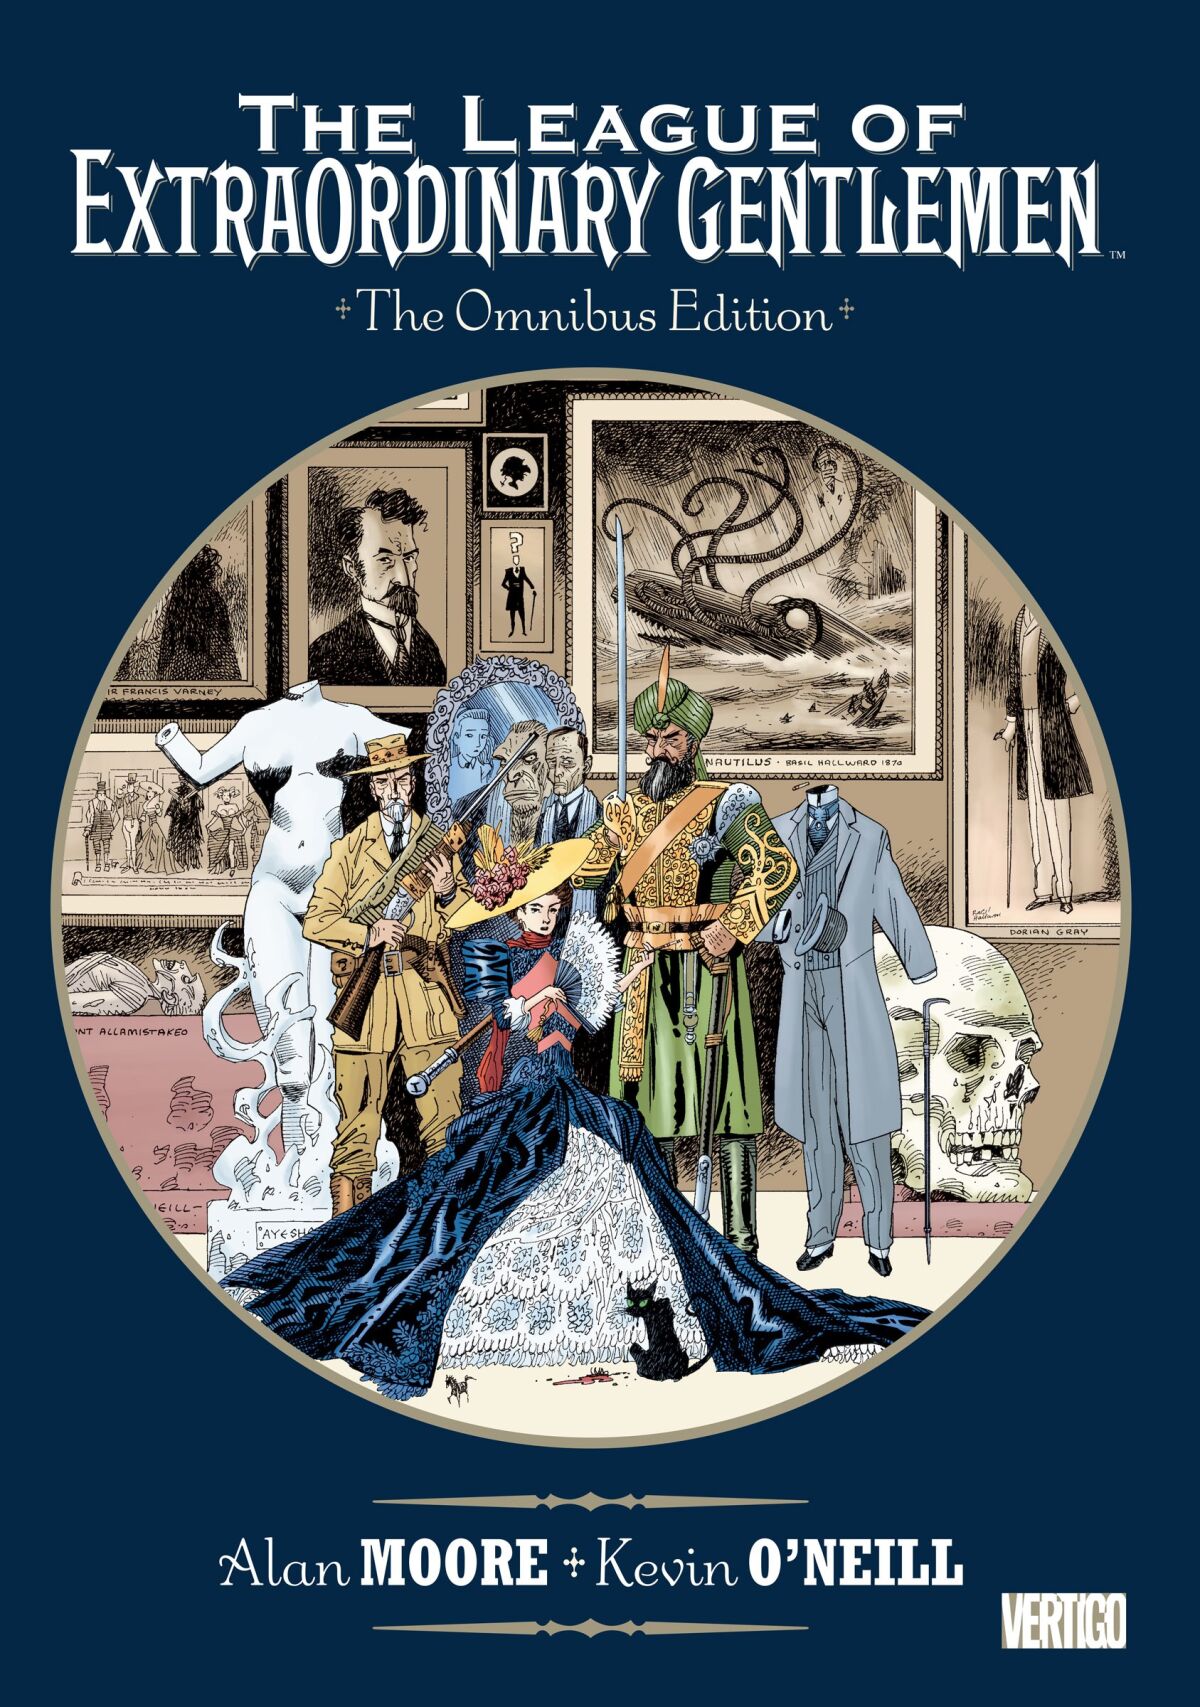 The cover of "The League of Extraordinary Gentlemen" Omnibus compilation by Alan Moore and Kevin O'Neill.